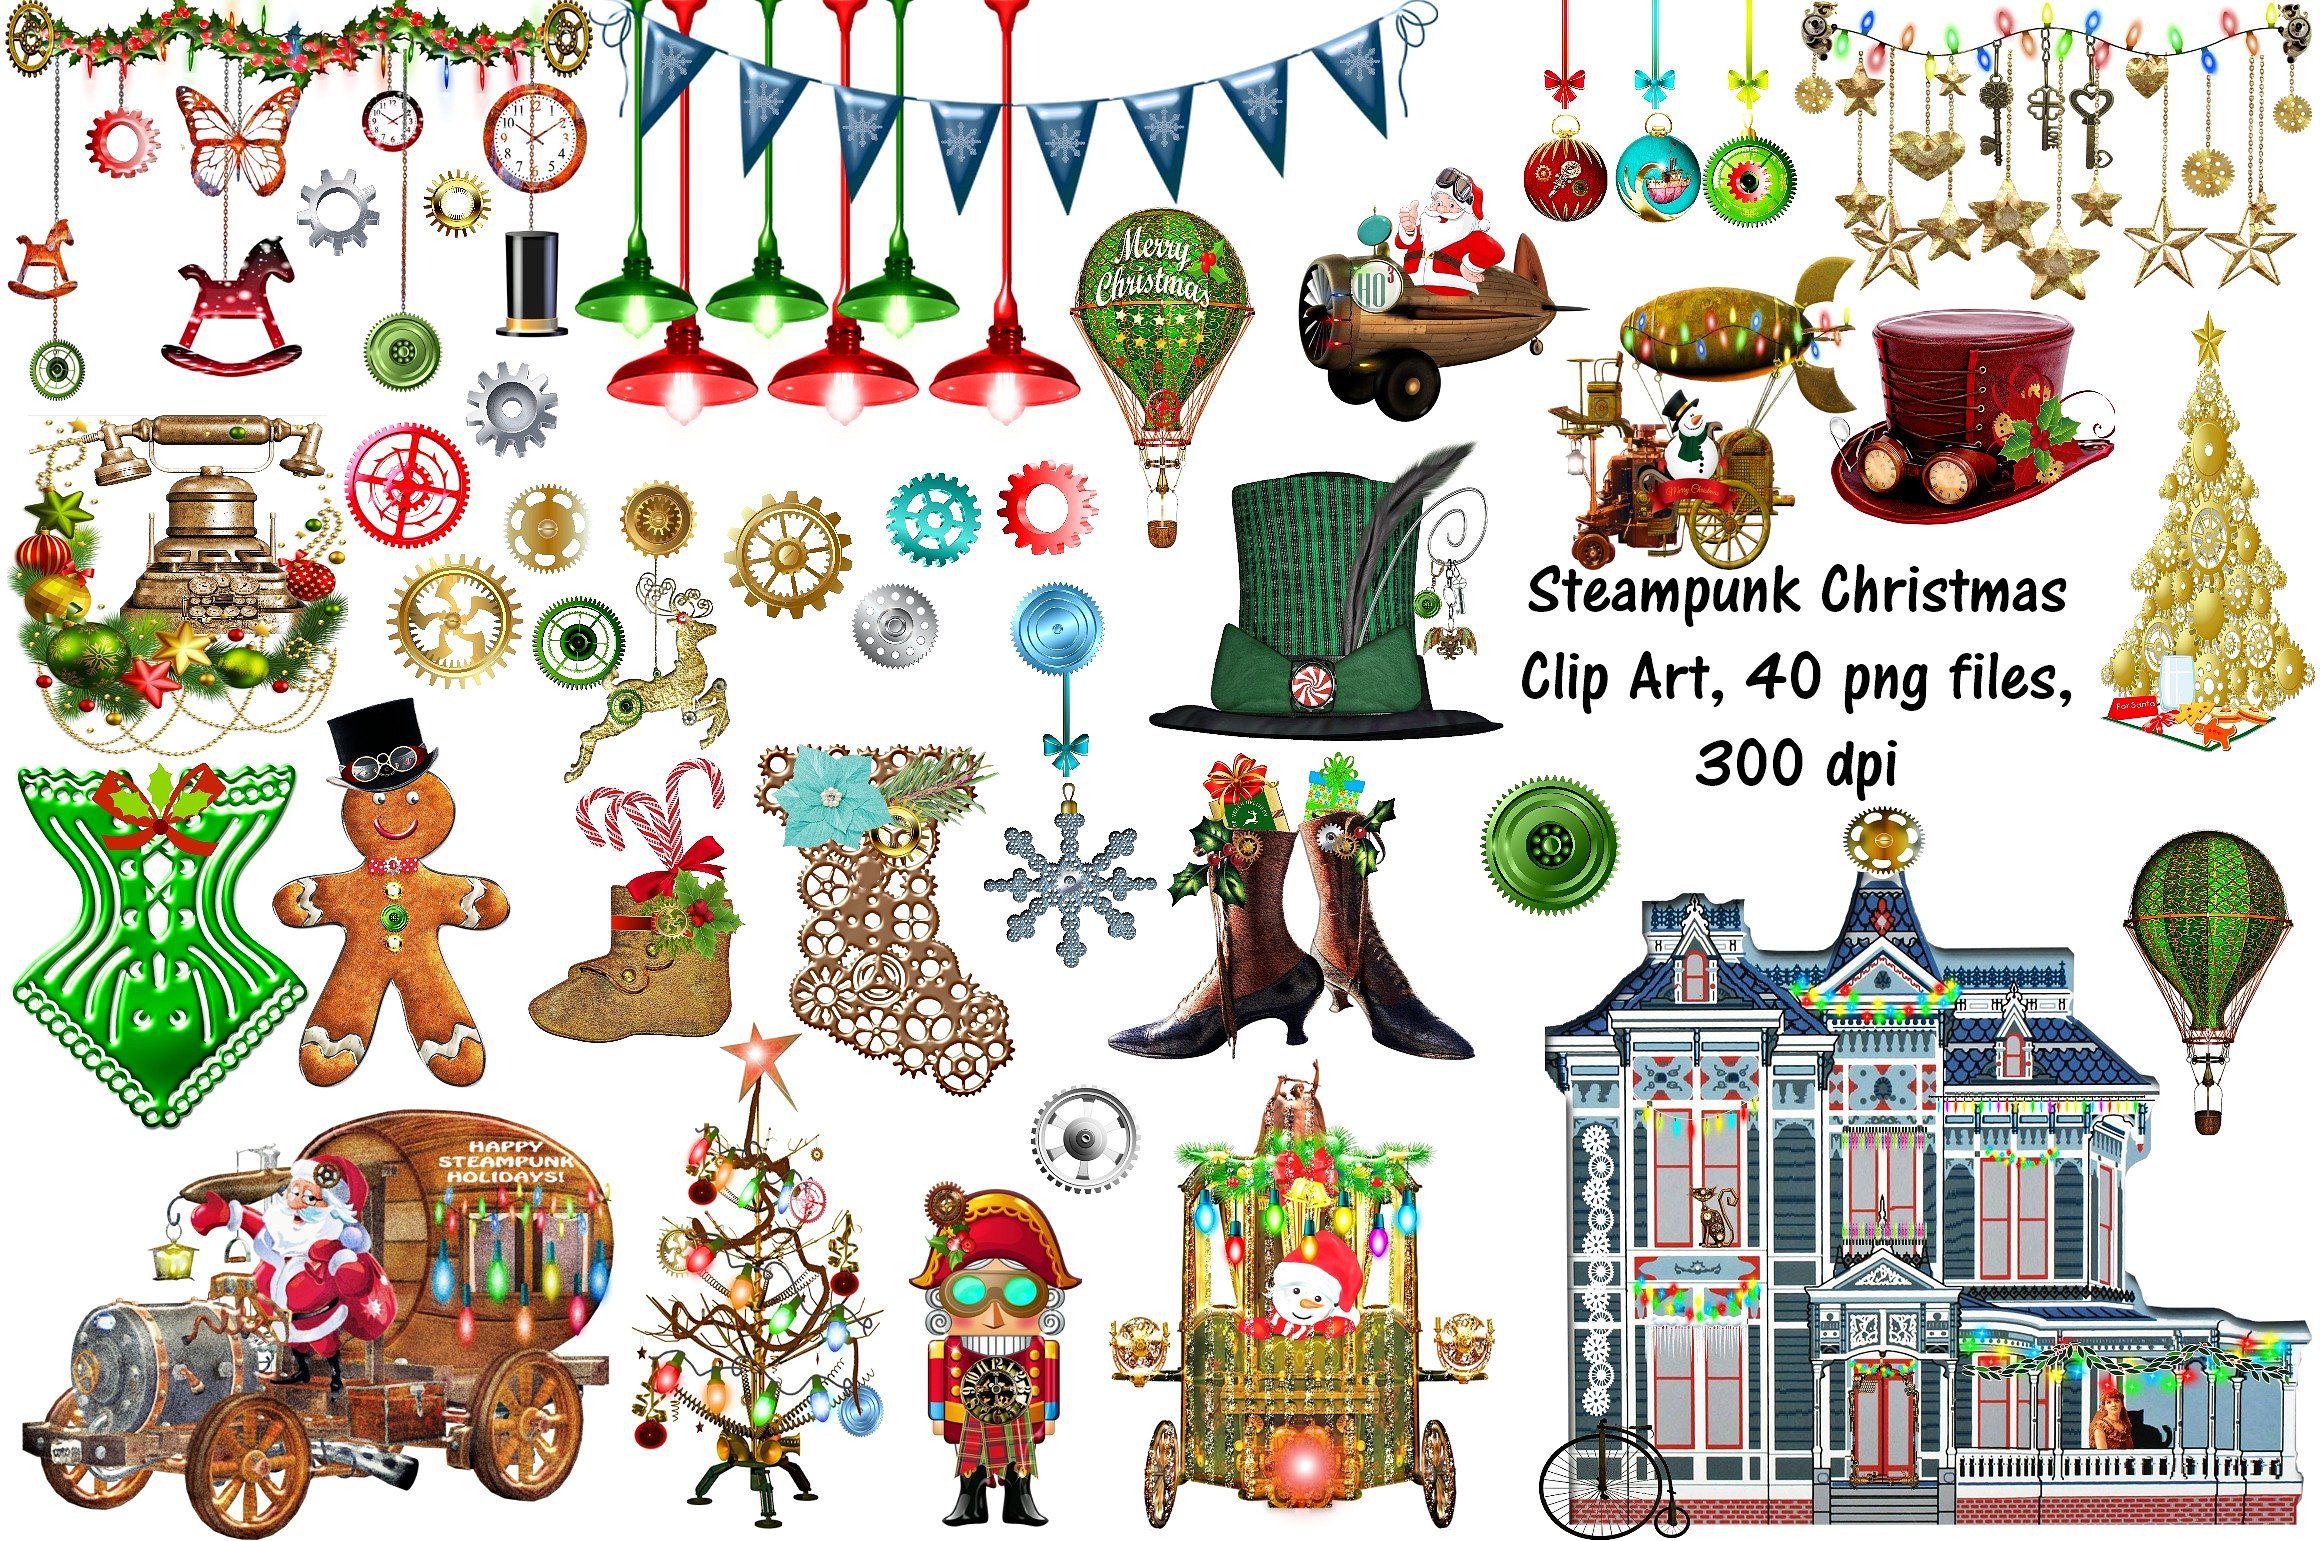 Clip art by frankiesdaughtersdesign. Steampunk clipart christmas